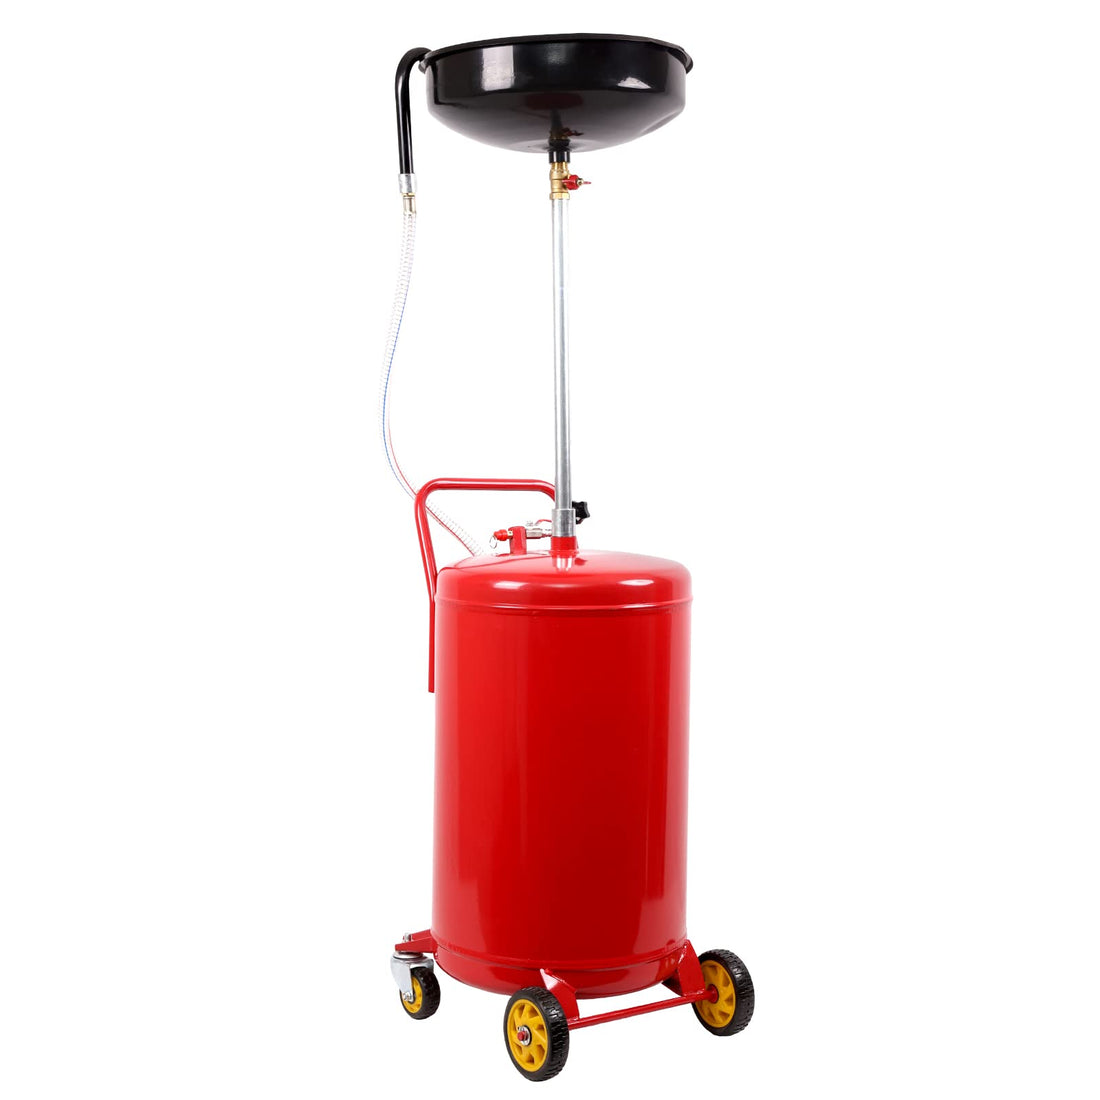 20 Gal Upright Portable Oil Lift Drain with Pan & Funnel